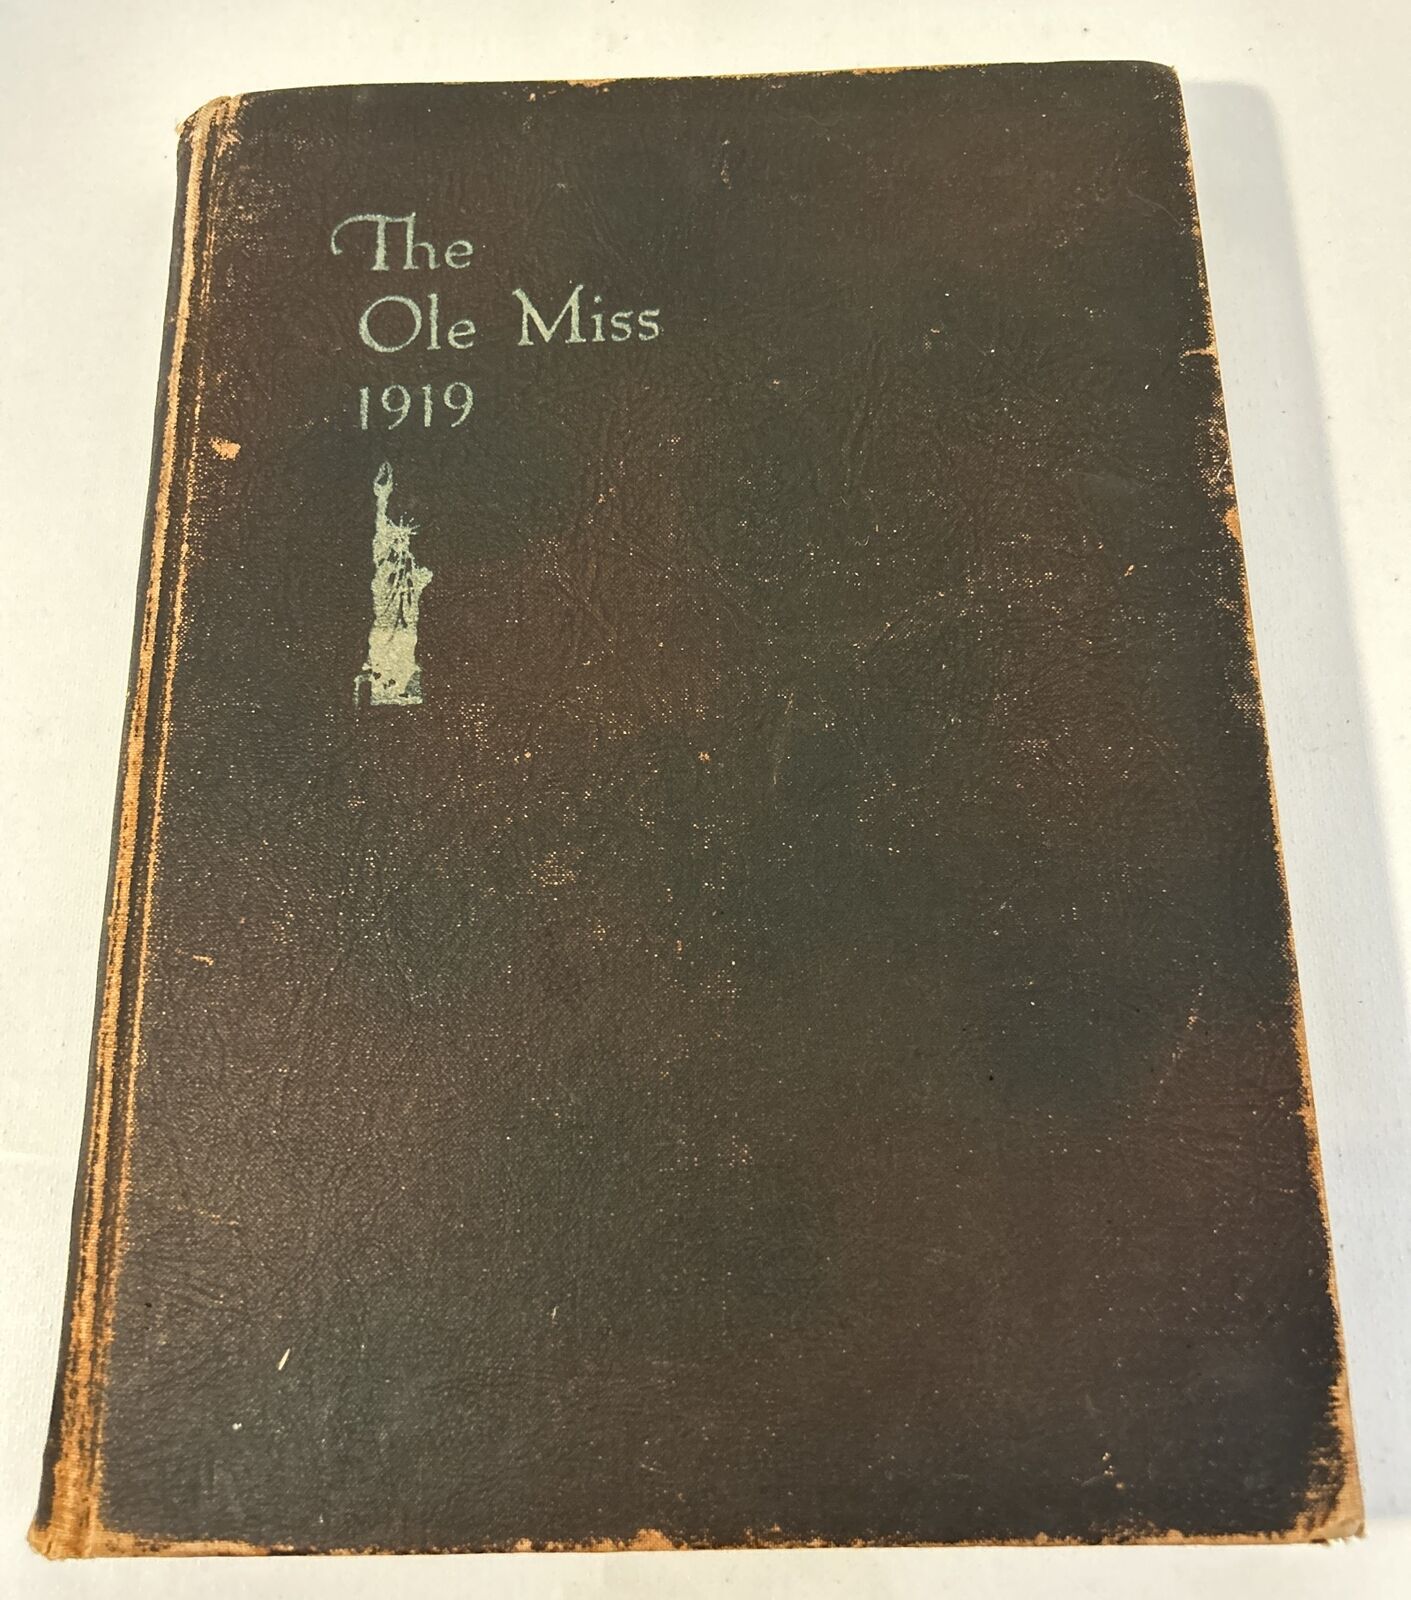 RARE 1919 Vintage The Ole Miss Yearbook University of Mississippi Read Year Book